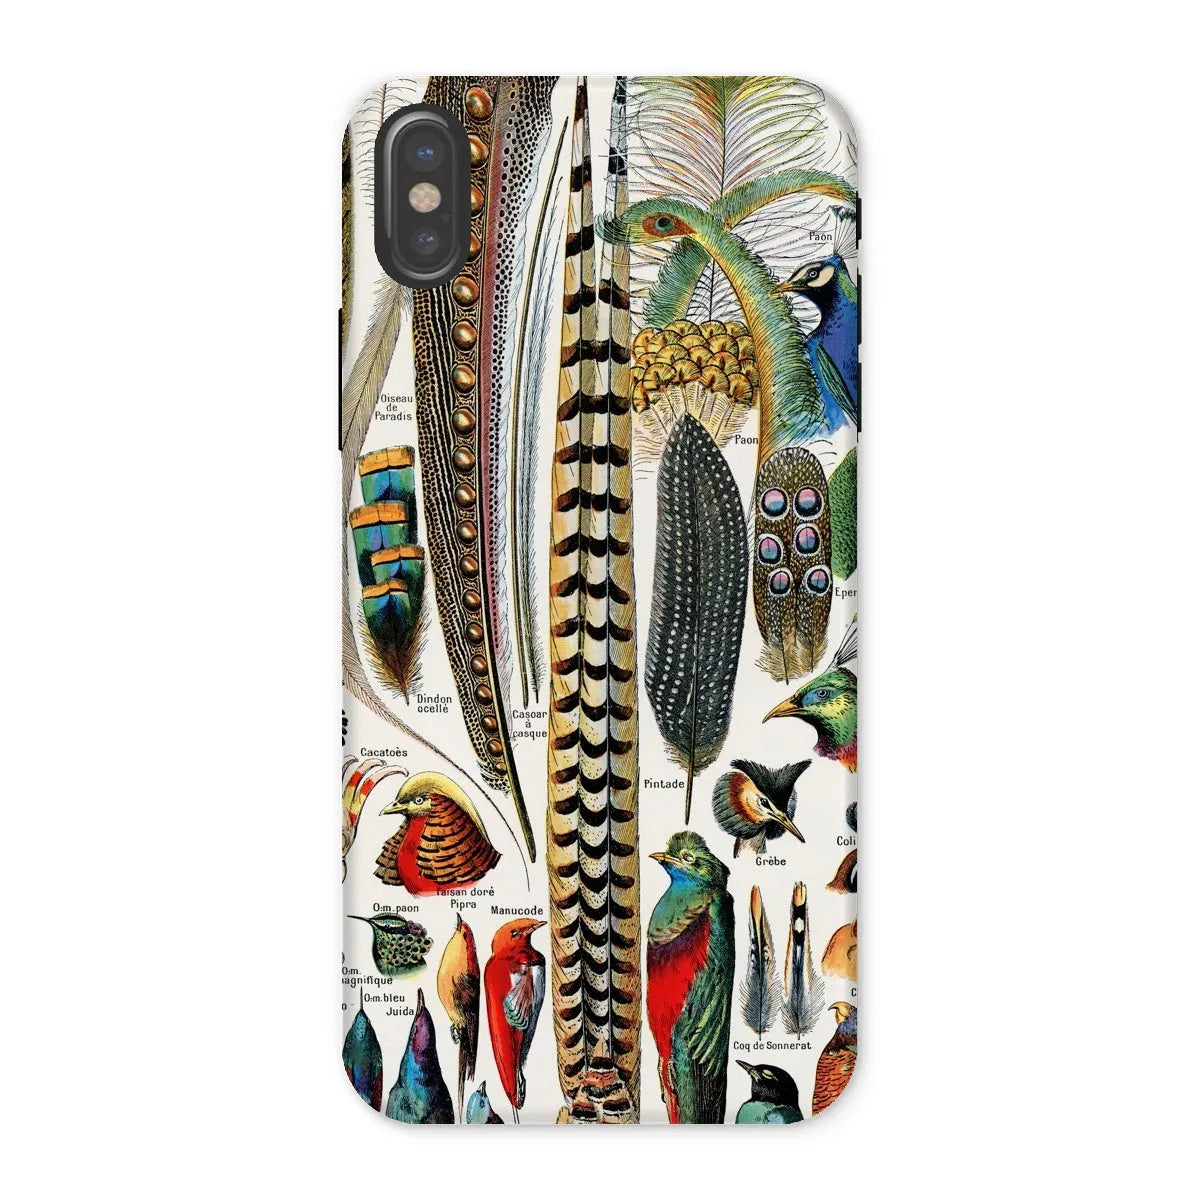 Plumes - Feathers By Adolphe Millot Tough Phone Case - Iphone x / Matte - Aesthetic Art